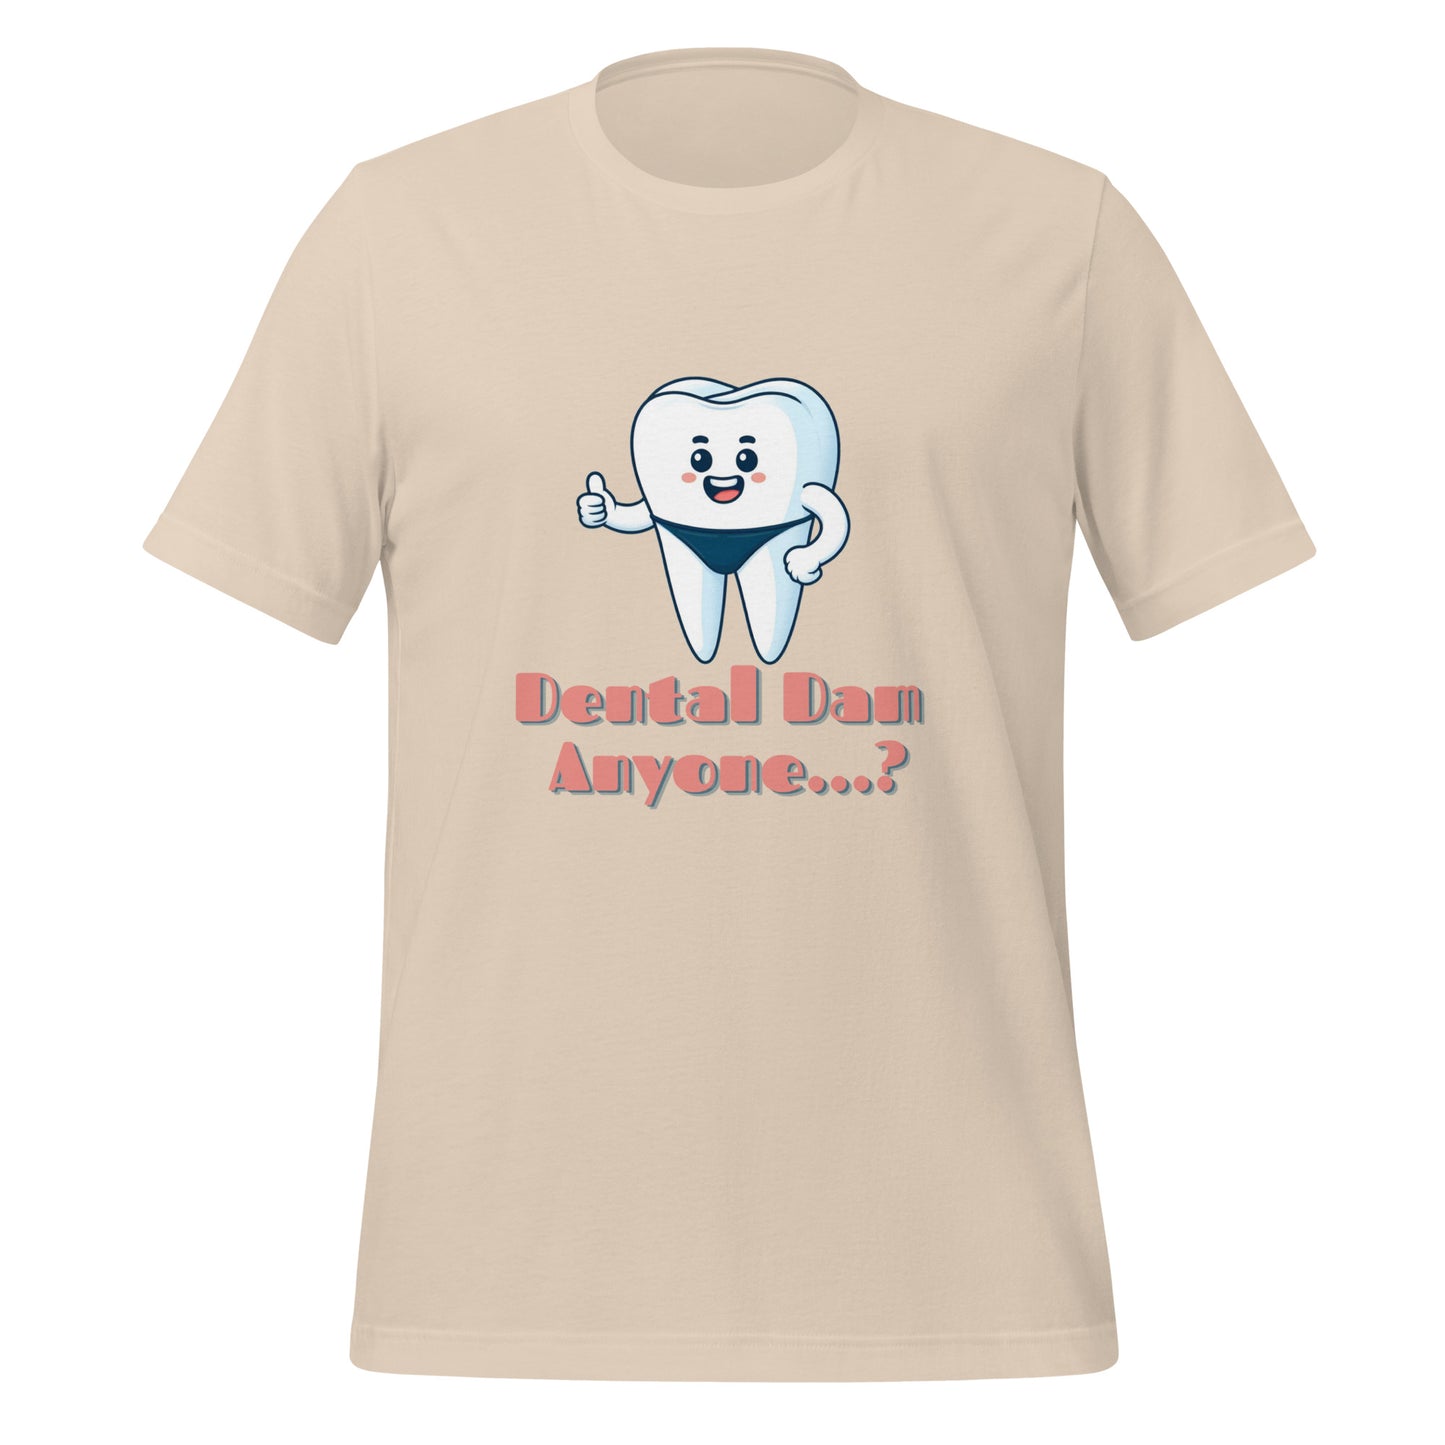 Funny dental shirt featuring a playful tooth character in a speedo with the text ‘Dental Dam Anyone?’, perfect for dentists, dental hygienists, and dental students who enjoy dental humor. This dental shirt is a unique addition to any dental professional’s wardrobe, making it an ideal dental office shirt. Don’t miss out on our dental assistant shirts and dental hygiene shirts. Soft cream color.